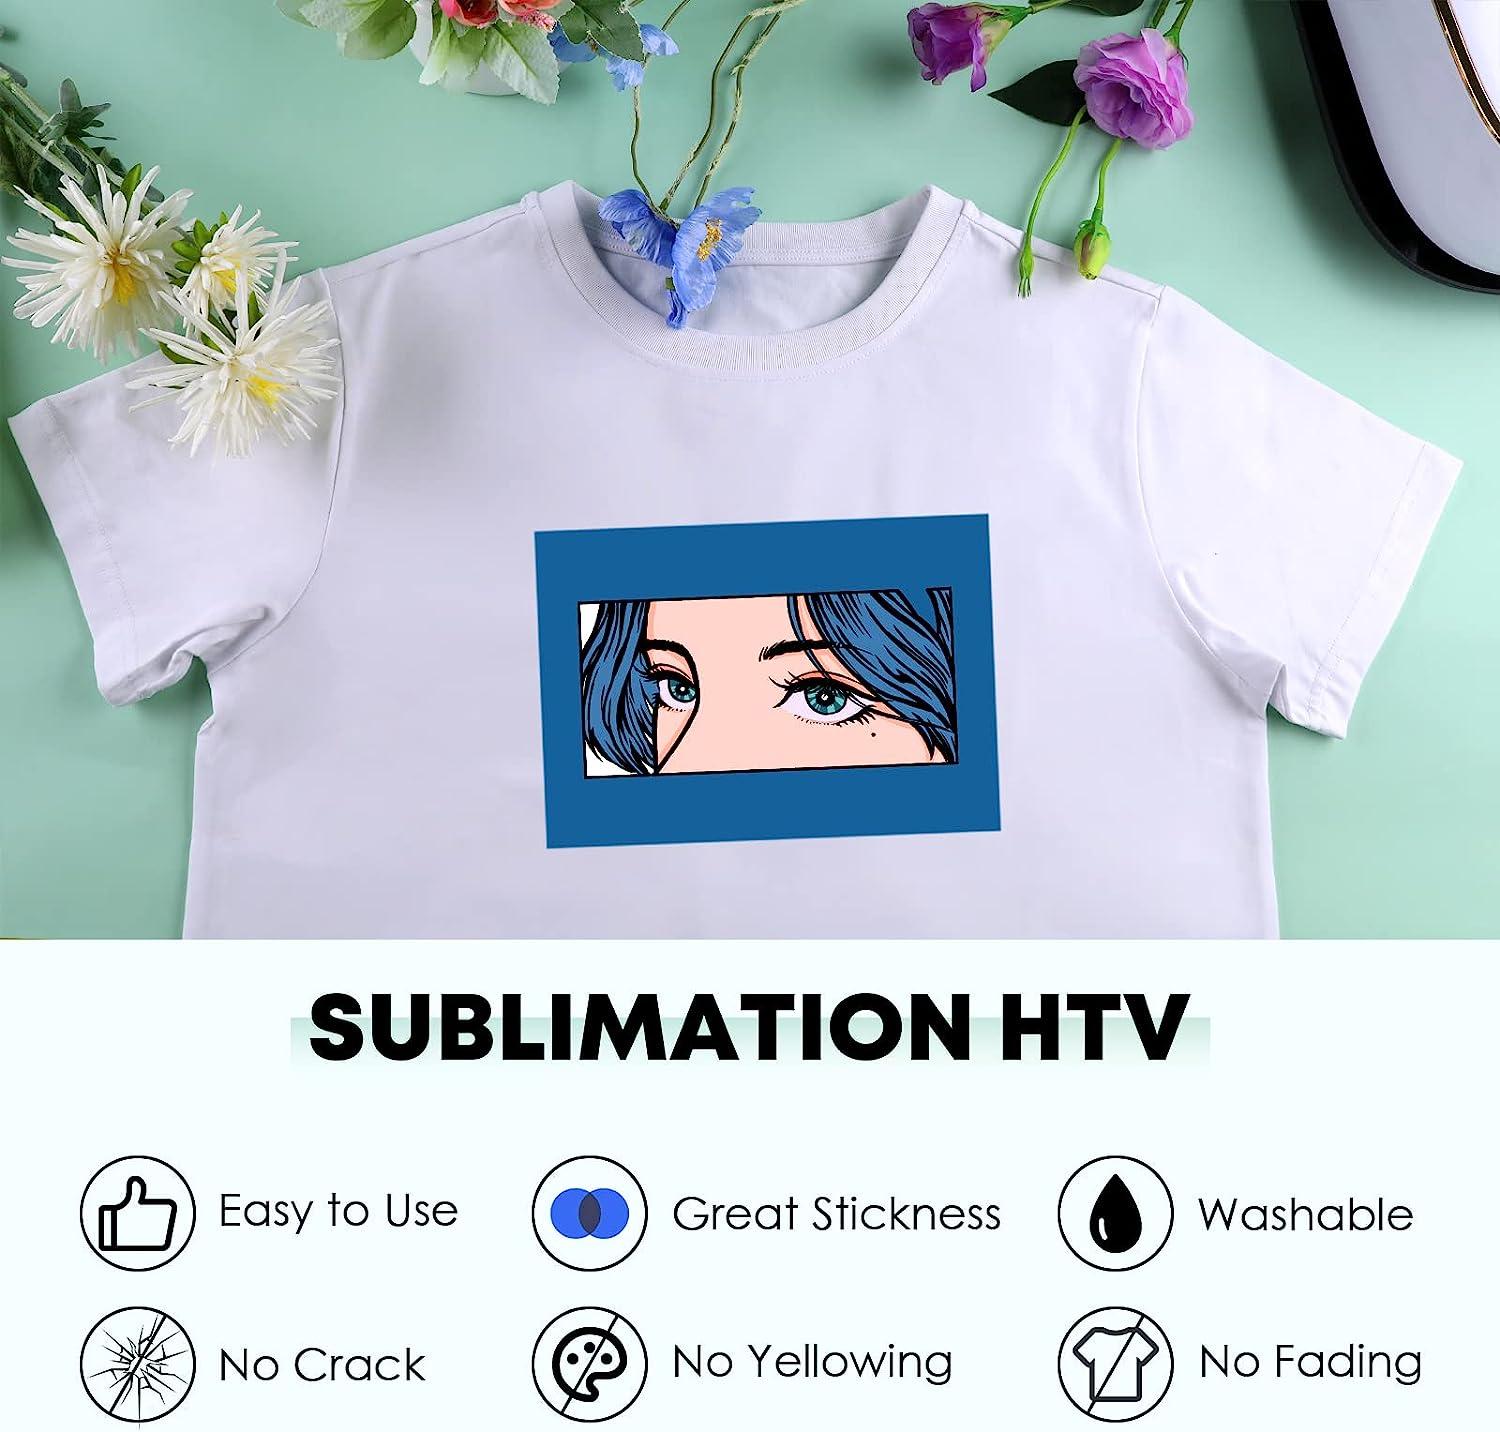 HTVRONT Clear HTV Vinyl for Sublimation - 12 X 8FT Matte Sublimation Vinyl  for Cotton Fabric - Wash Durable Clear Dye Sub HTV for Light-Colored T  Shirts